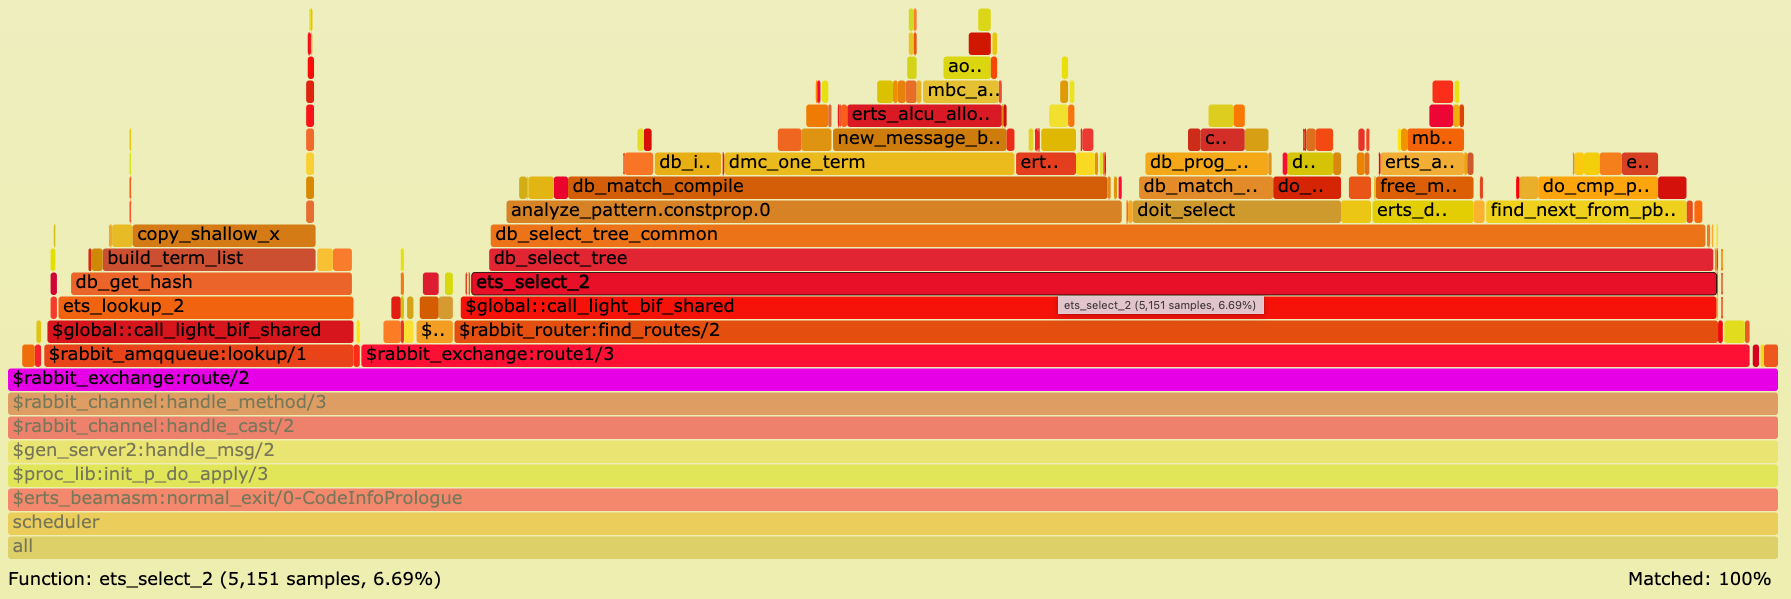 Figure 2: CPU Flame Graph - RabbitMQ v3.10.1 - zoomed into function rabbit_exchange/2